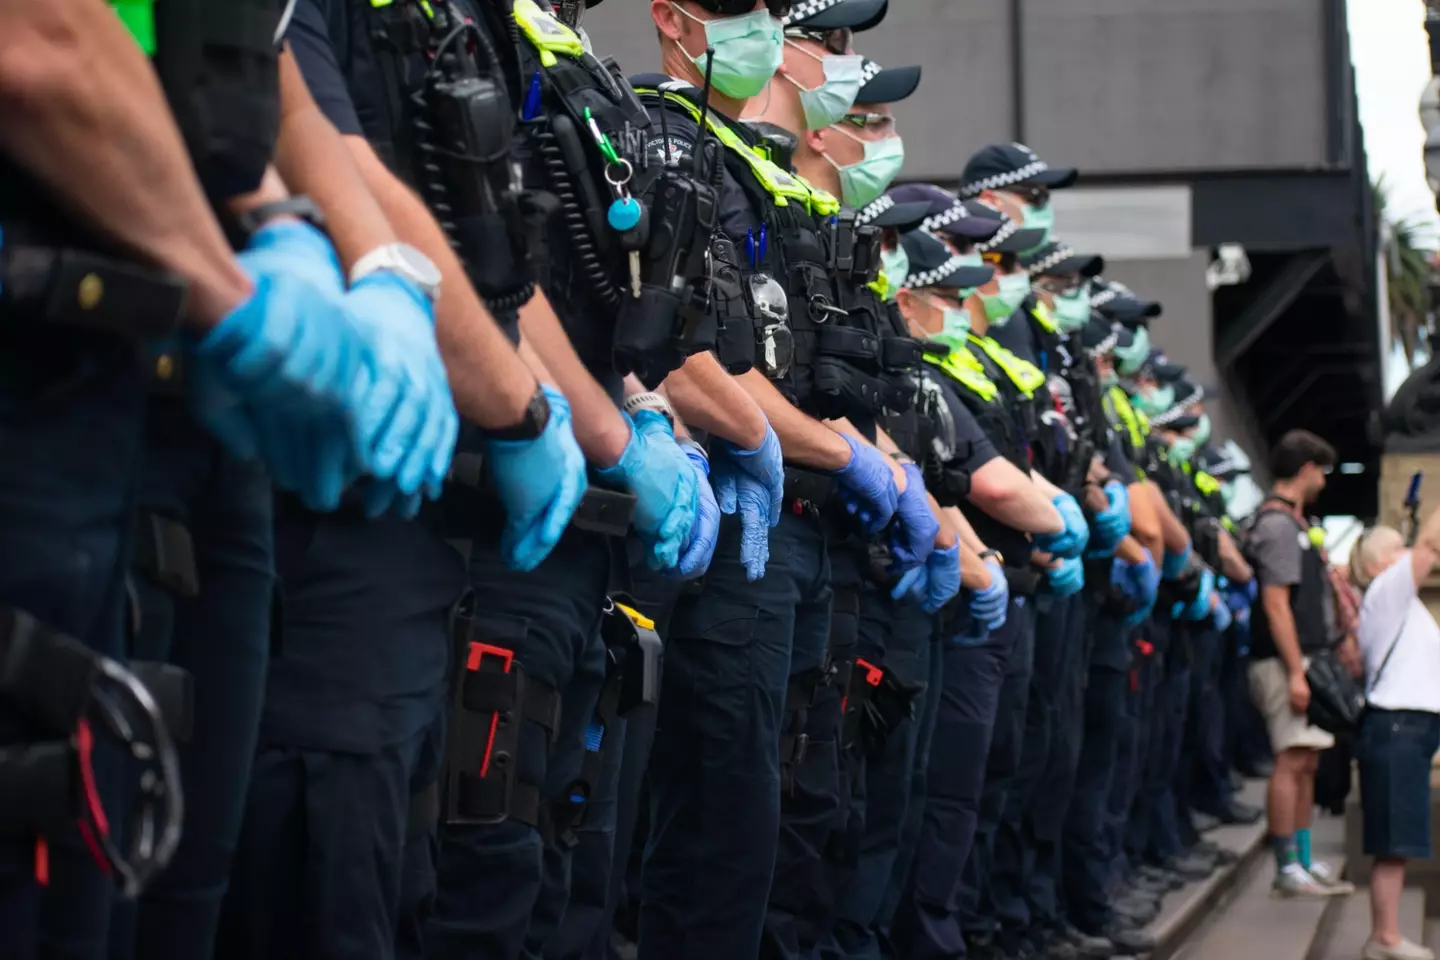 Aussie cops out in force to ensure lockdown mandates are followed.